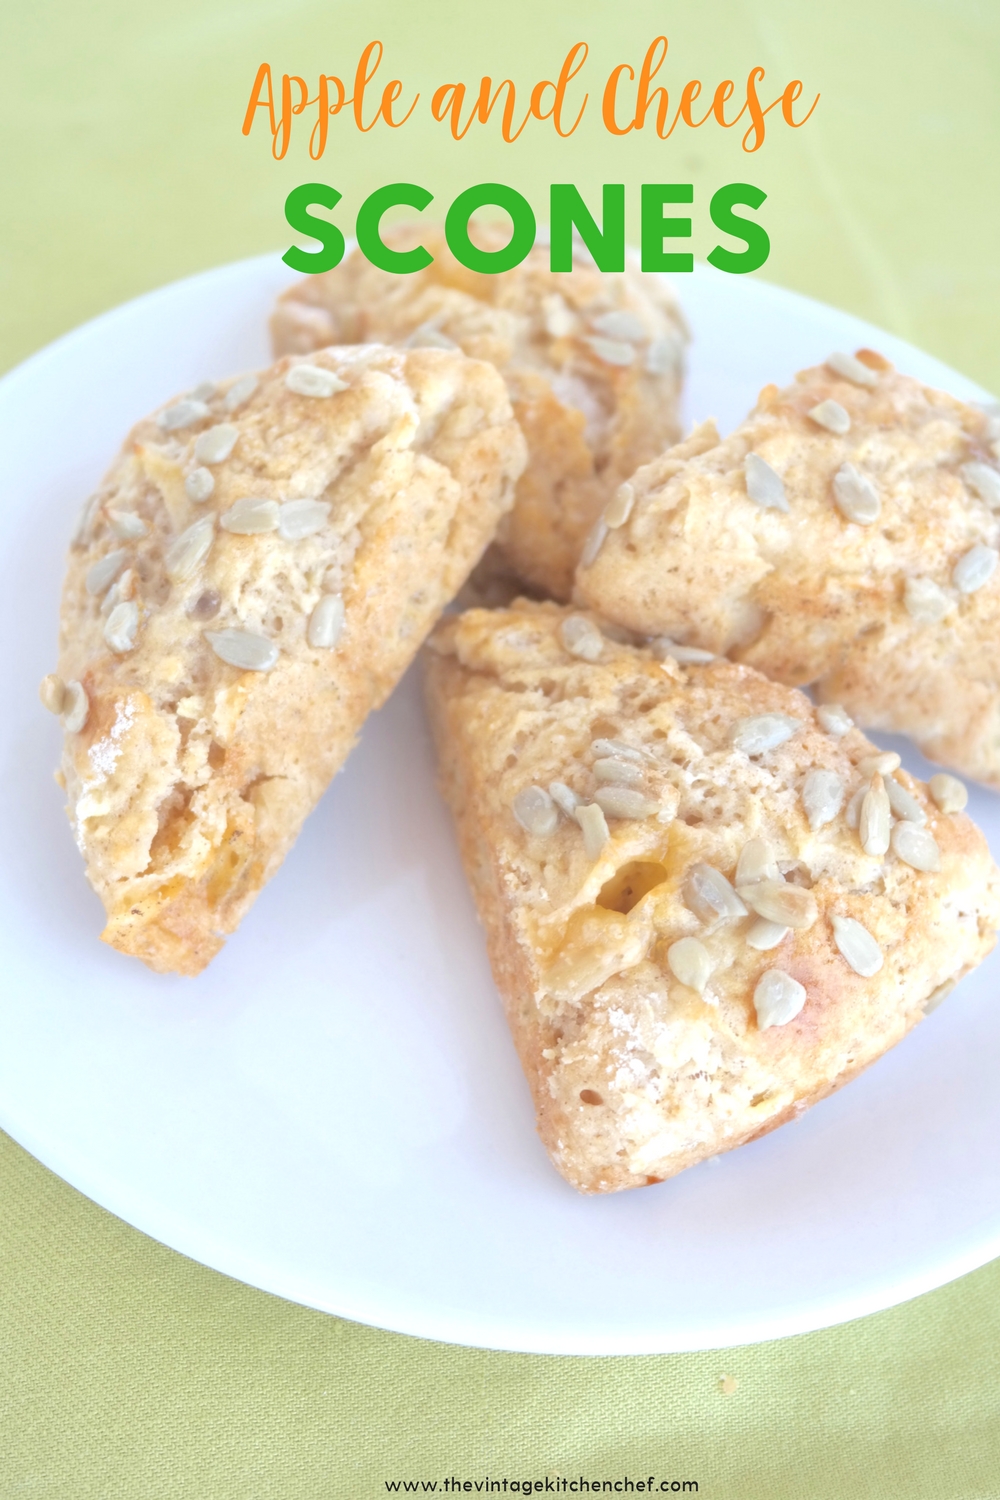 Fresh Apple and Cheese Scones are baked with bits of fresh apple and cheese, and a touch of crunchy sunflower seeds. Perfect for tea time or breakfast!